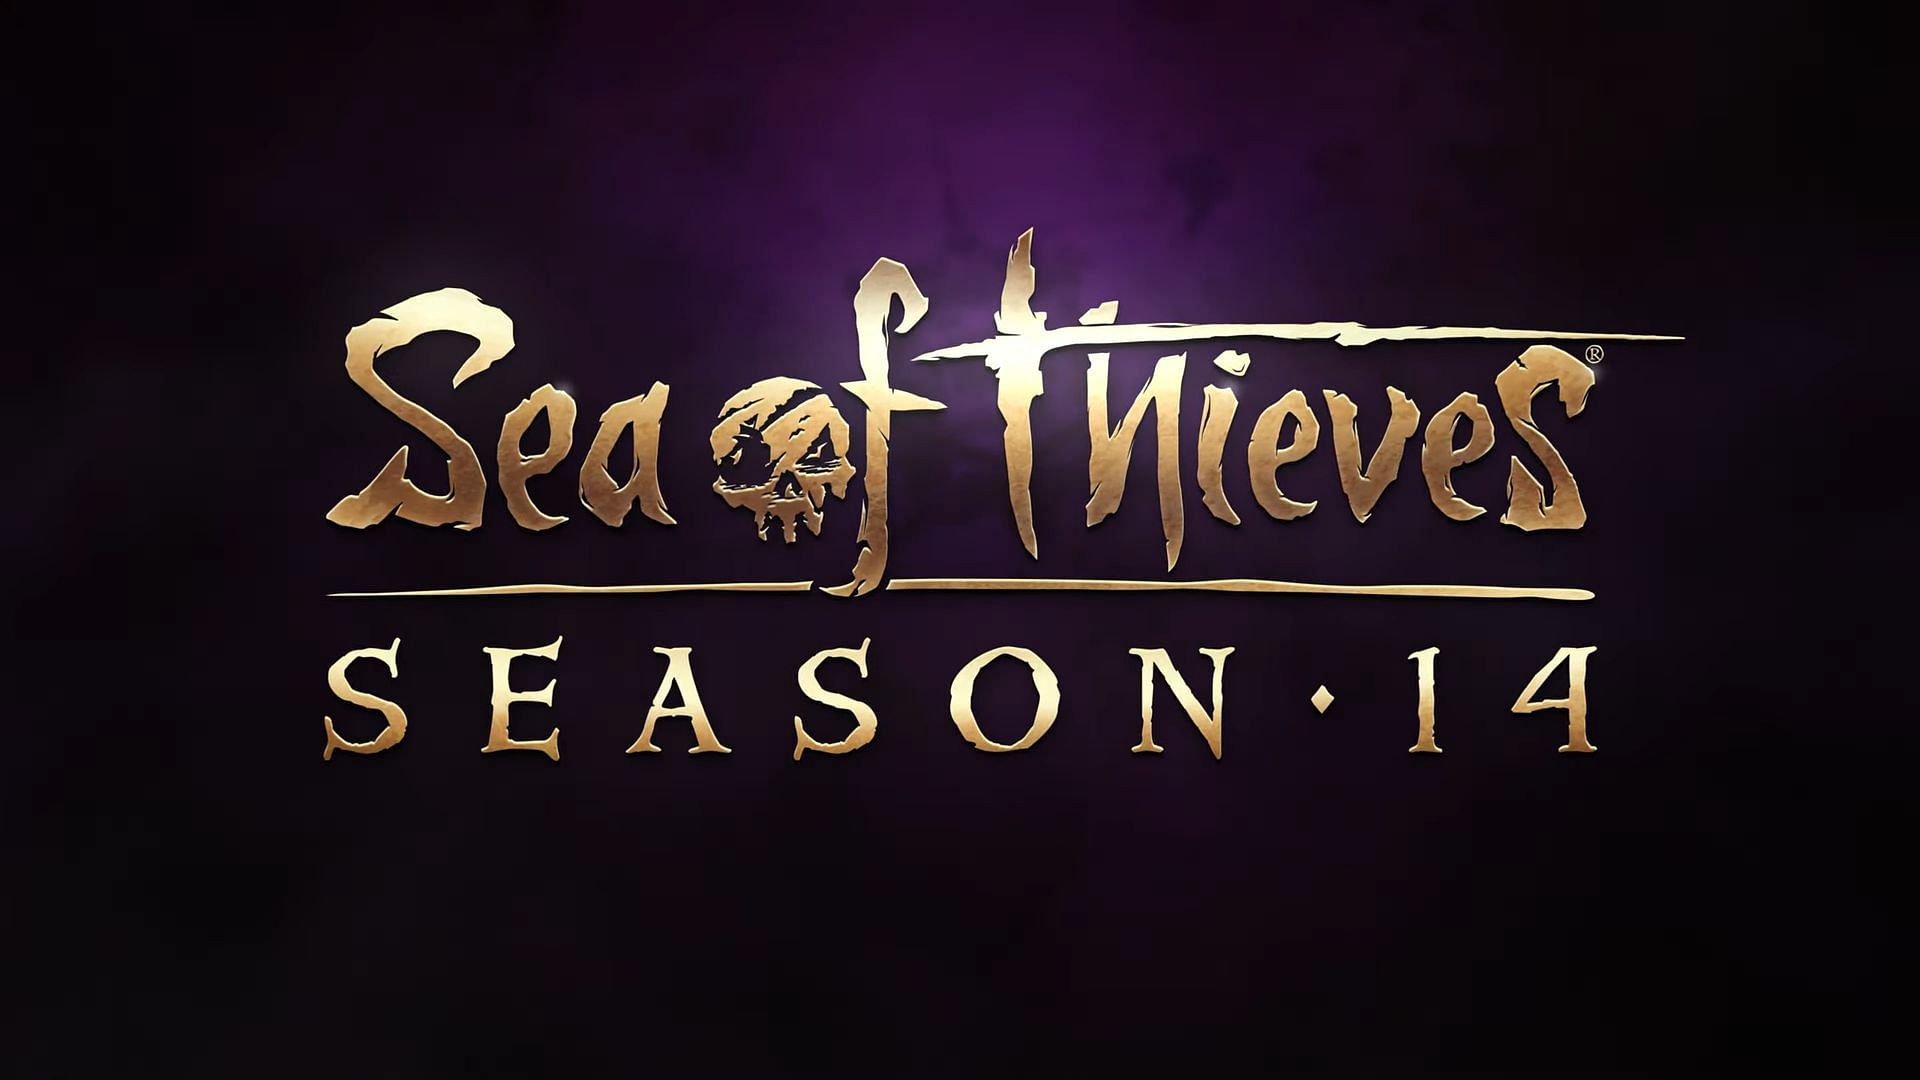 Sea of Thieves 2024 Preview Event reveals details about Season 14.